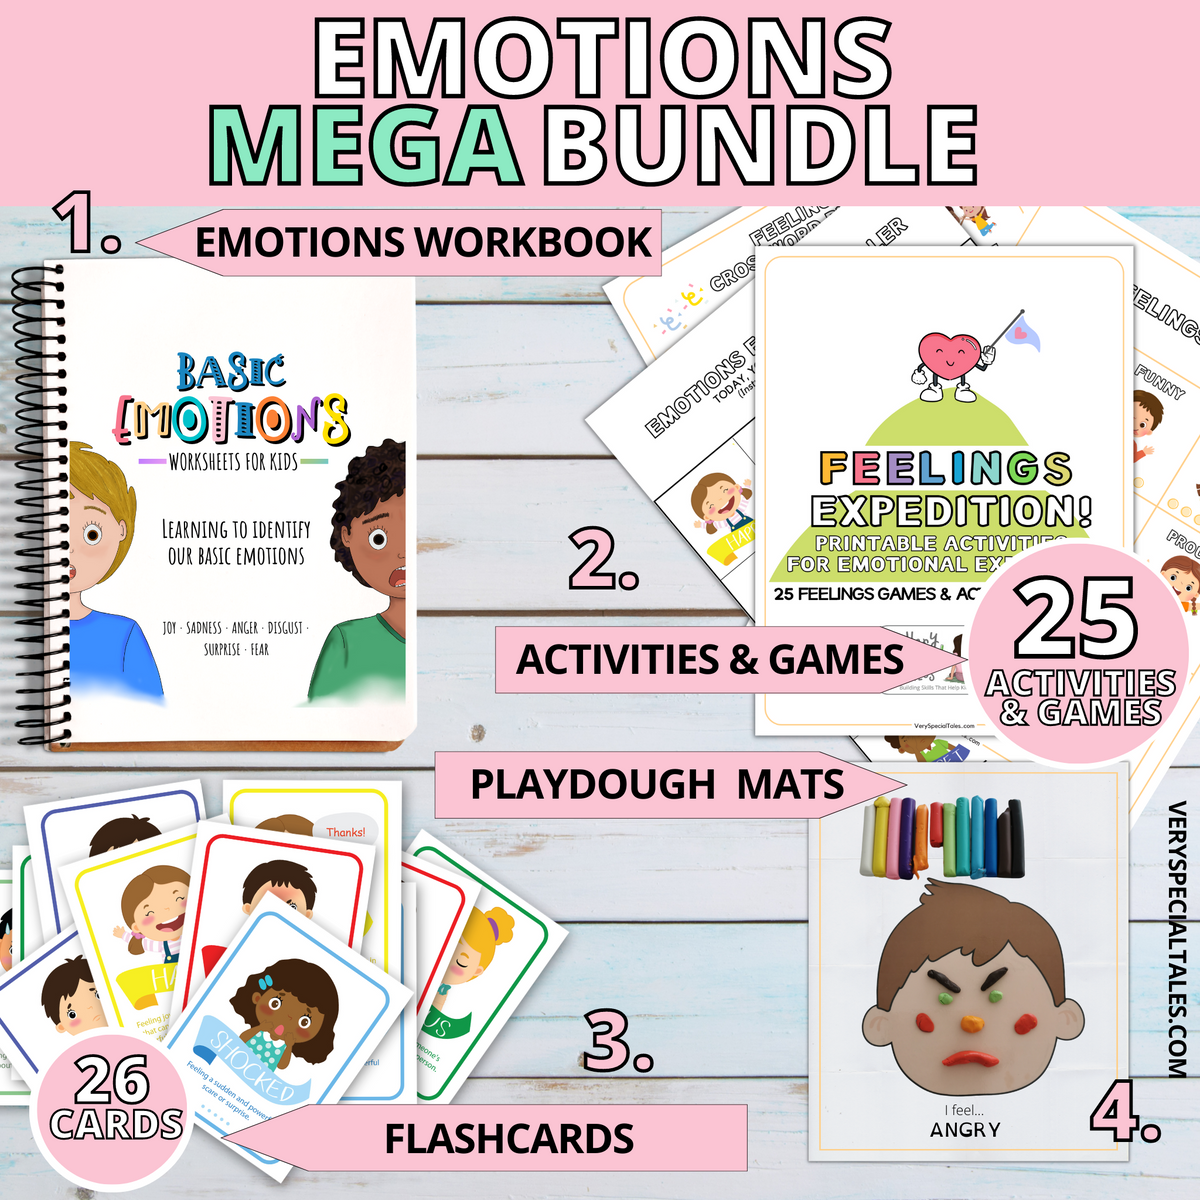 Emotions Bundle containing a Workbook, Activities and Games, Flashcards and Playdough Mats.